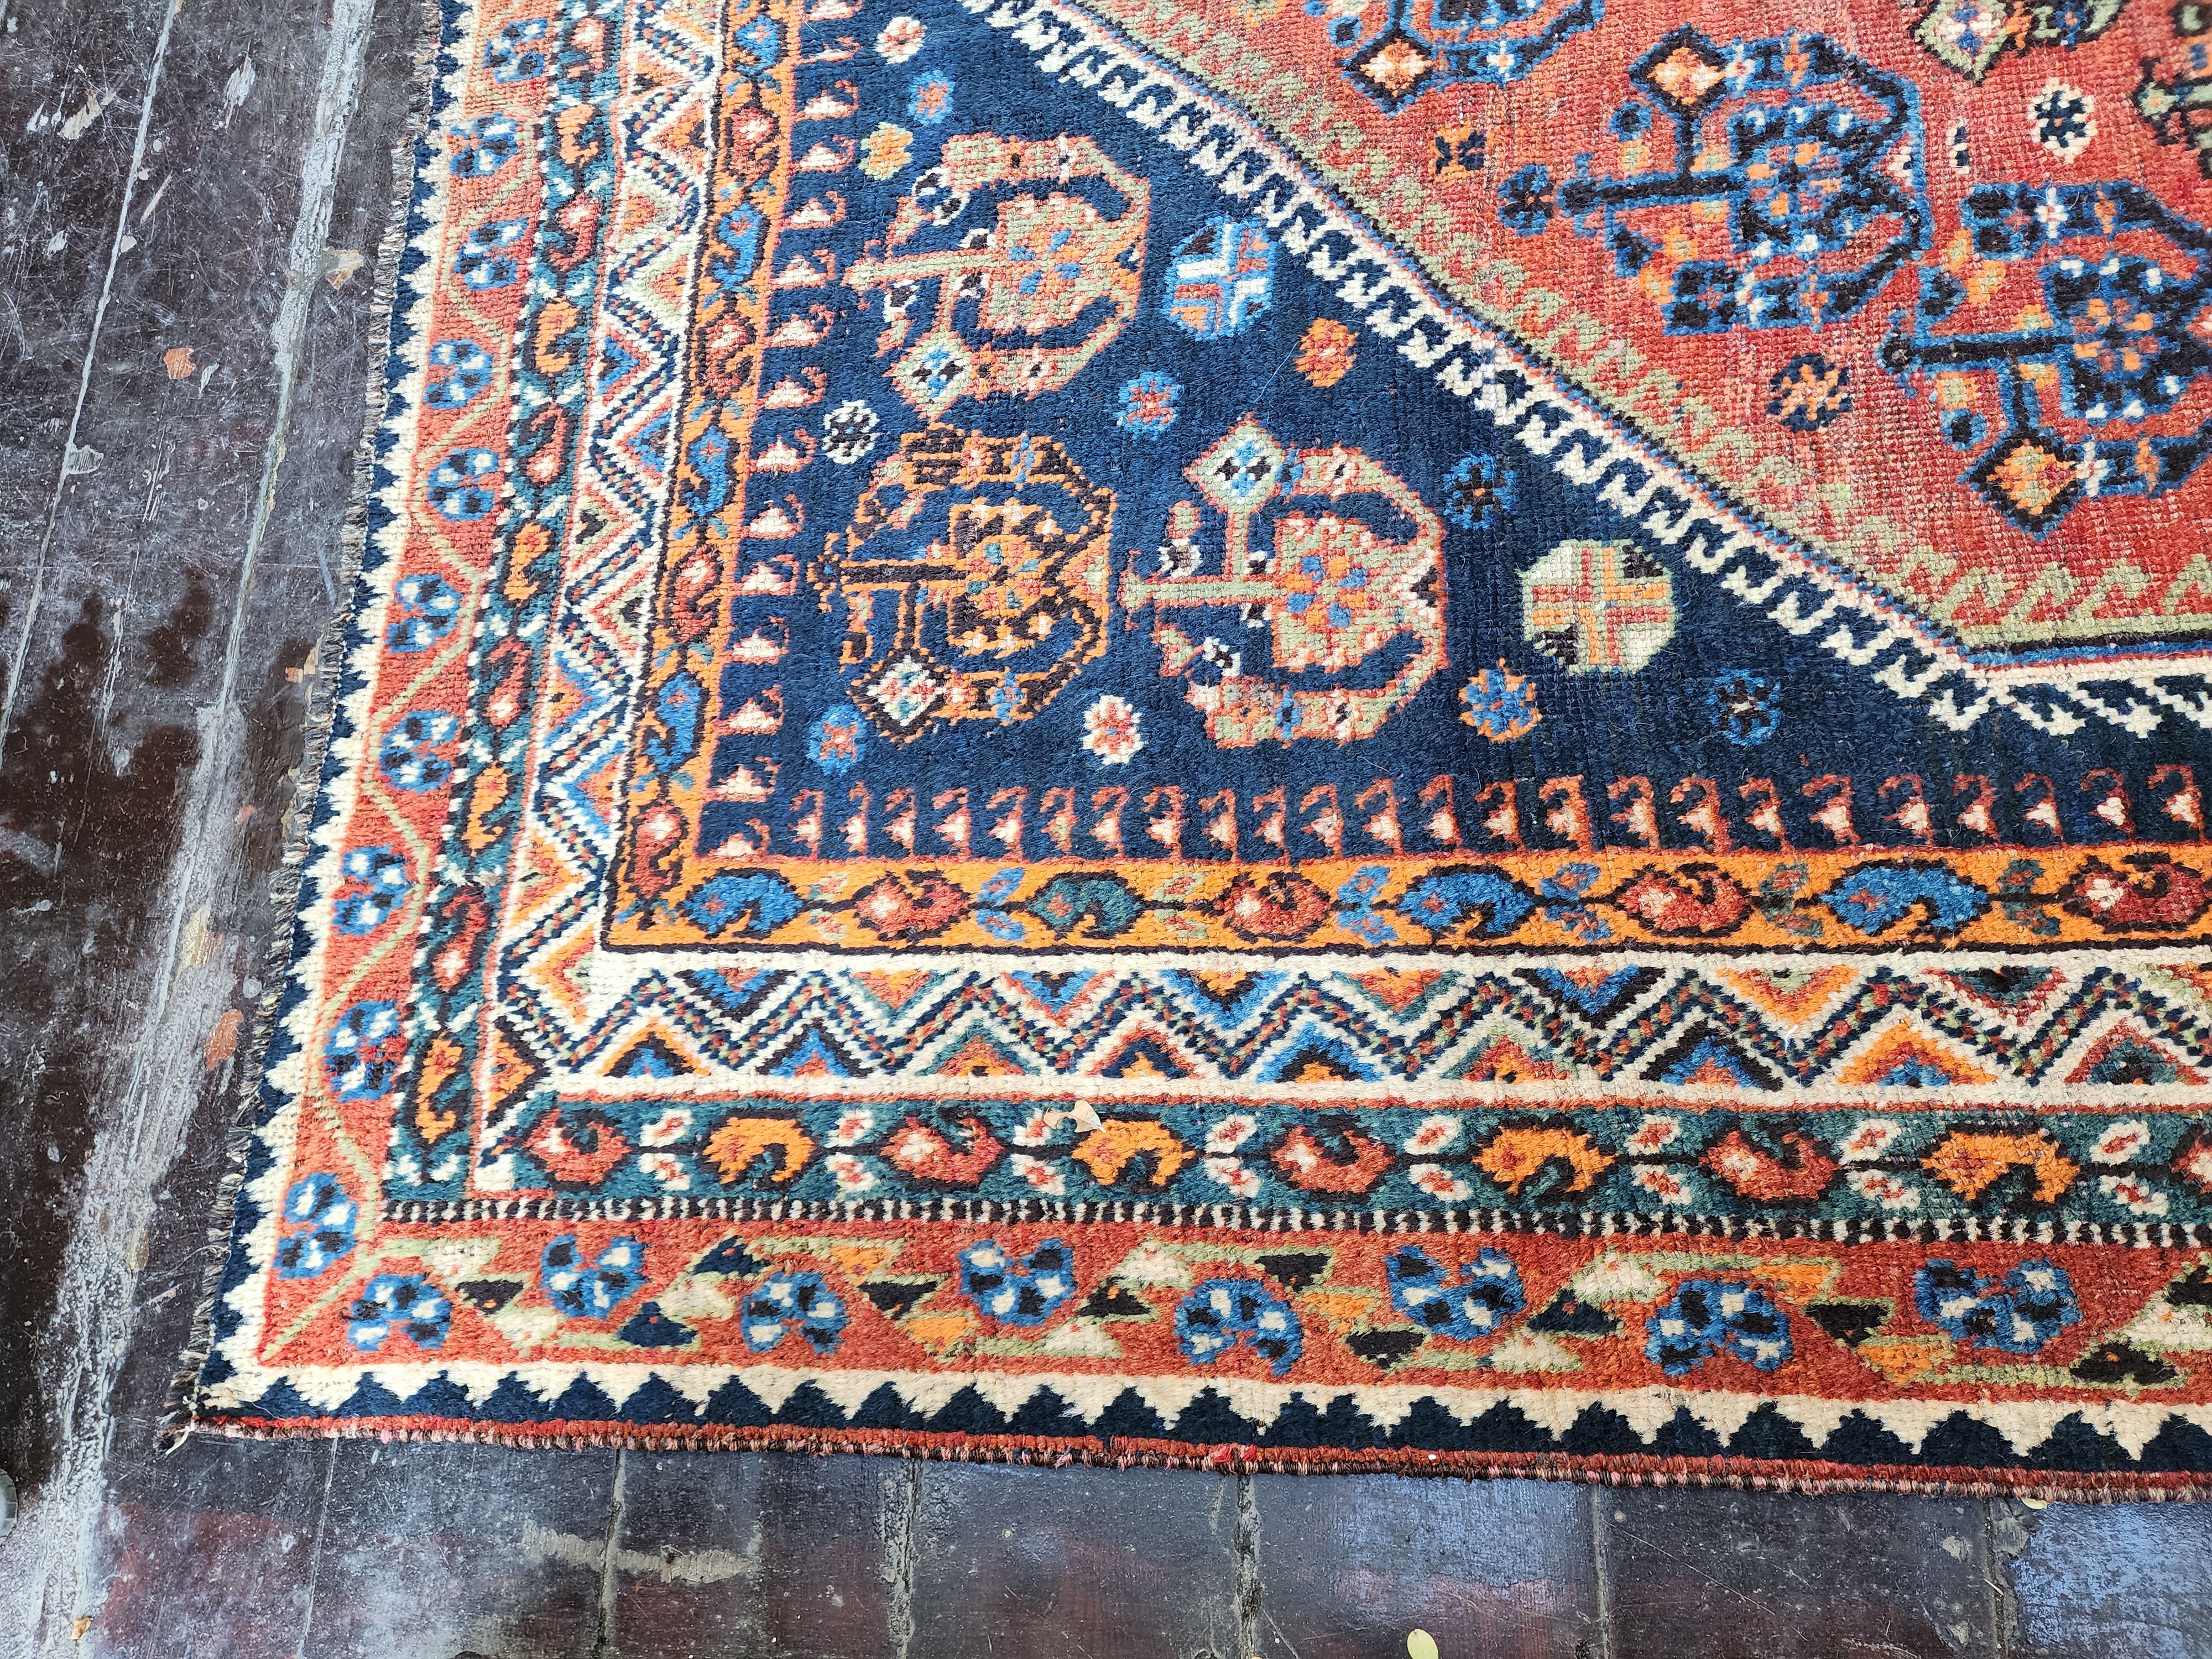 Vintage Persian Rug, 7 ft 9 in x 5 ft 5 in Red, Blue and White Large Turkish Carpet Handmade from Natural Wool